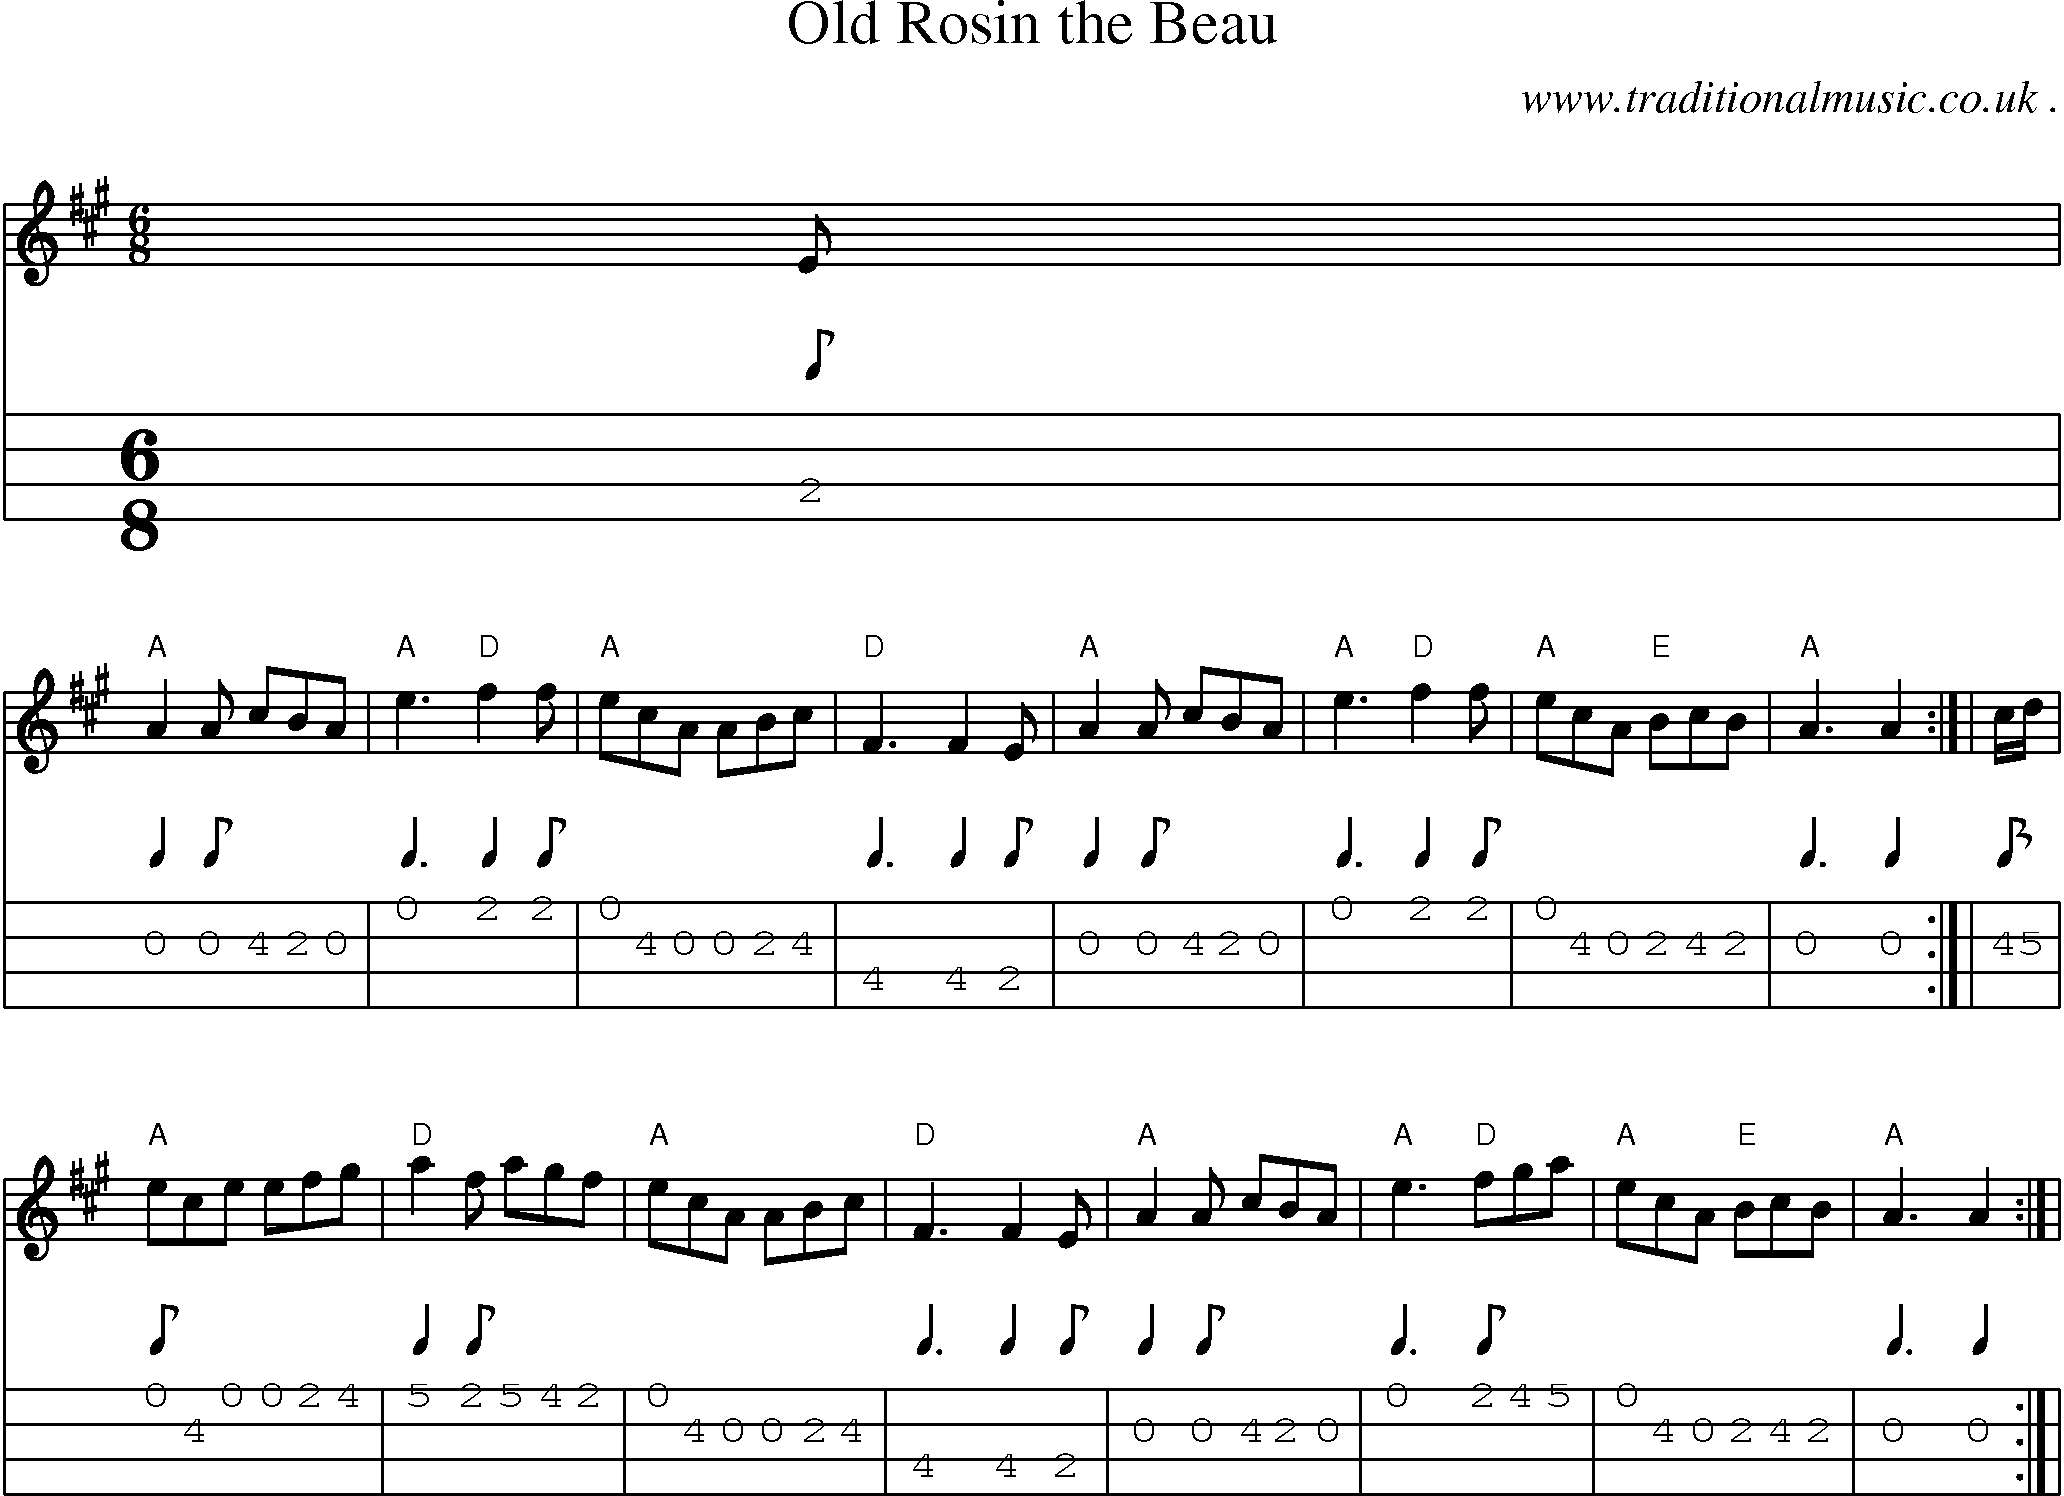 Sheet-music  score, Chords and Mandolin Tabs for Old Rosin The Beau